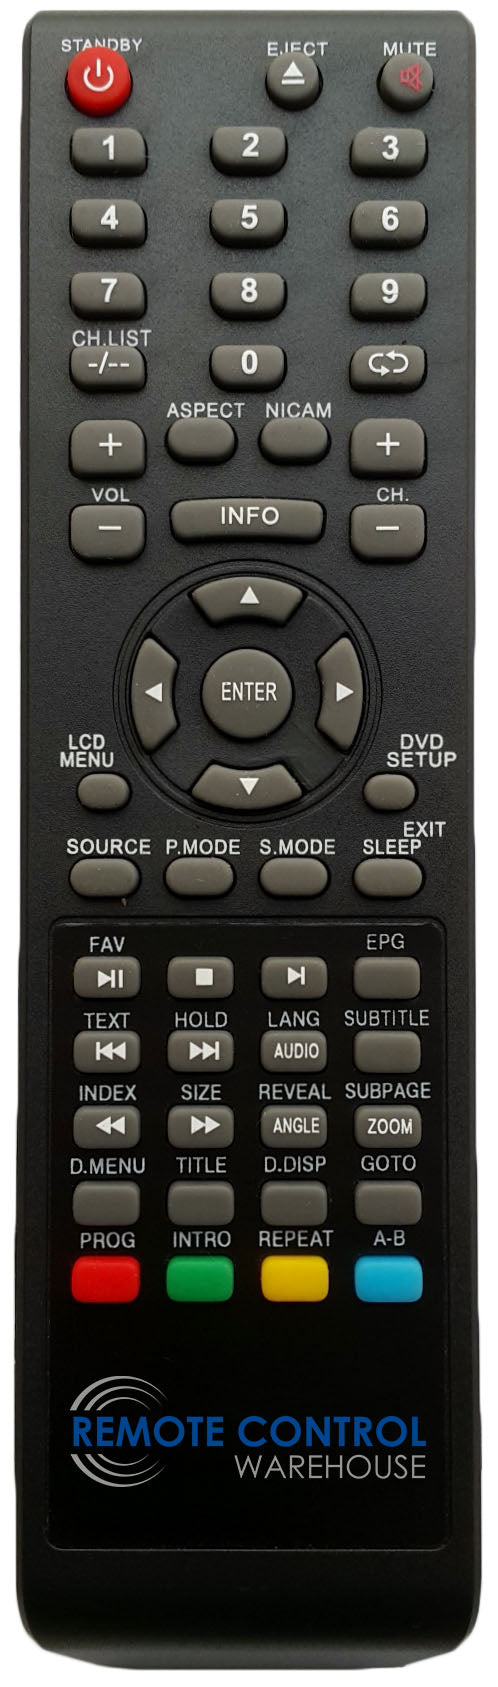 GRUNDIG REPLACEMENT REMOTE CONTROL - GLCD2206HDV LCD TV - Remote Control Warehouse